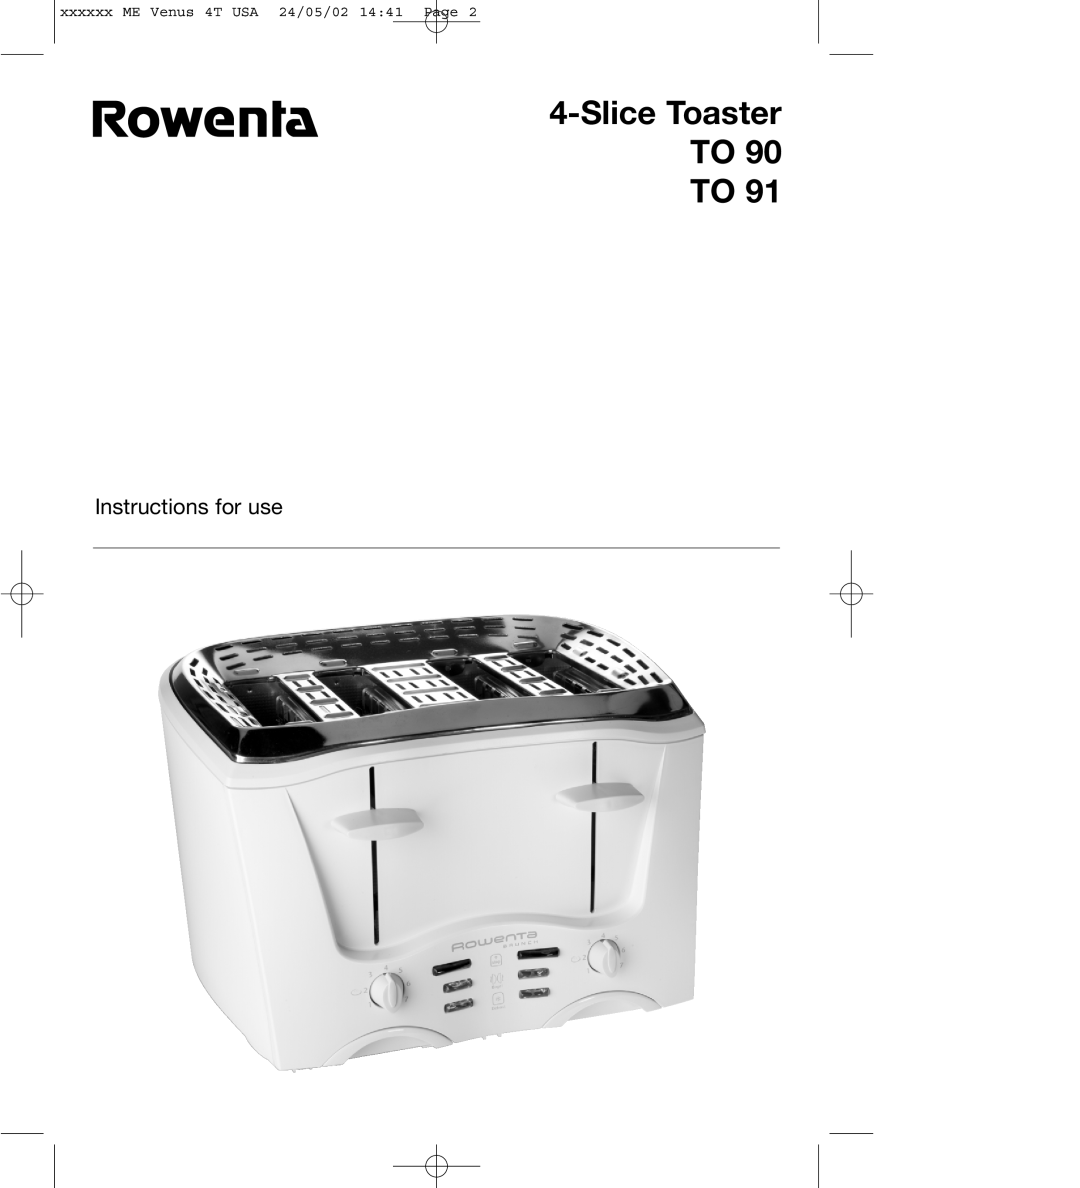 Rowenta TO 91 manual Slice Toaster TO 90 TO, Instructions for use, xxxxxx ME Venus 4T USA 24/05/02 1441 Page 